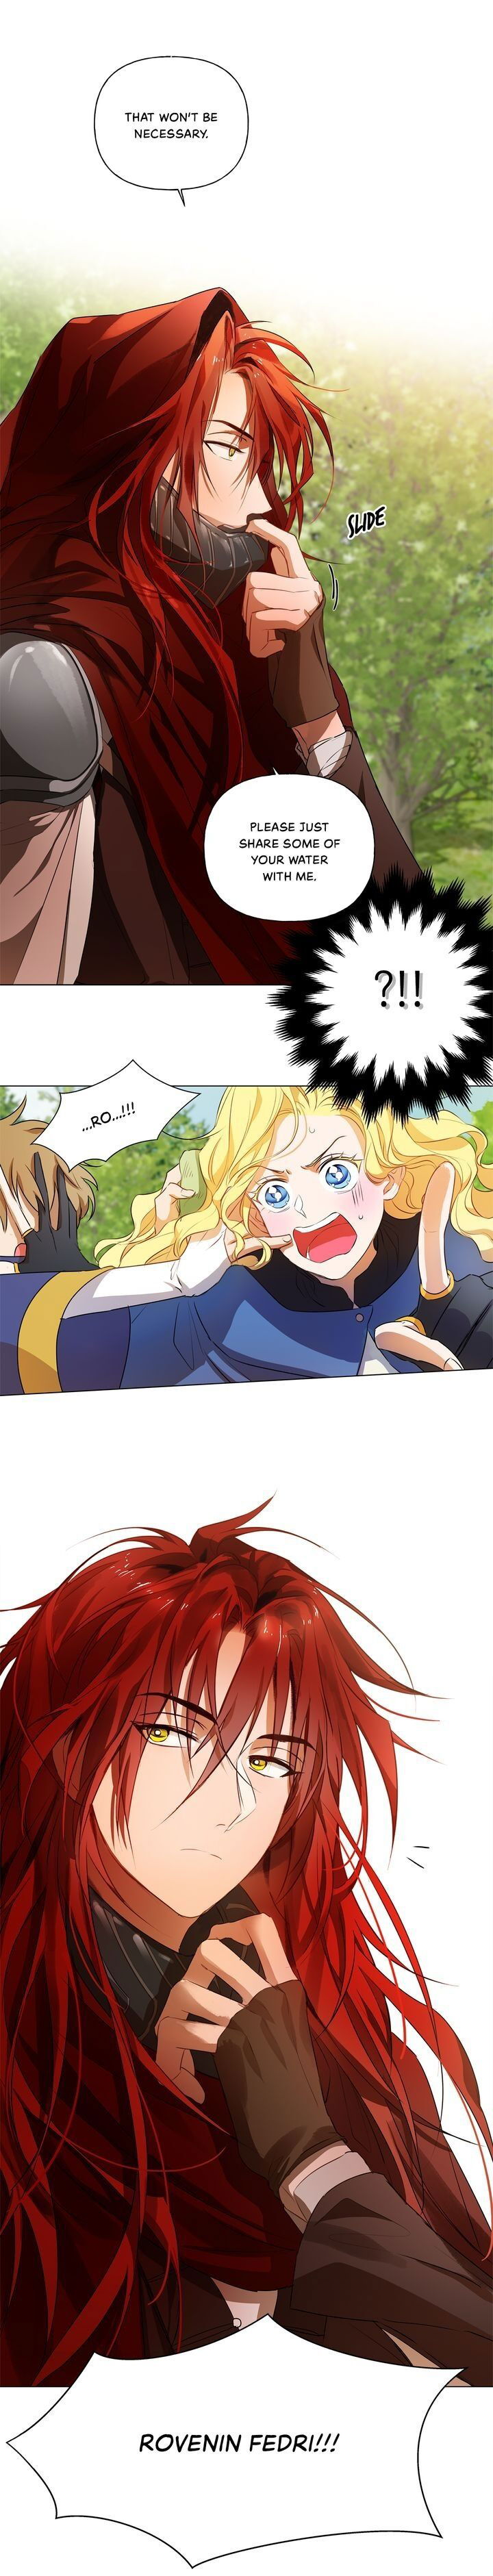 the-golden-haired-elementalist-chap-43-4